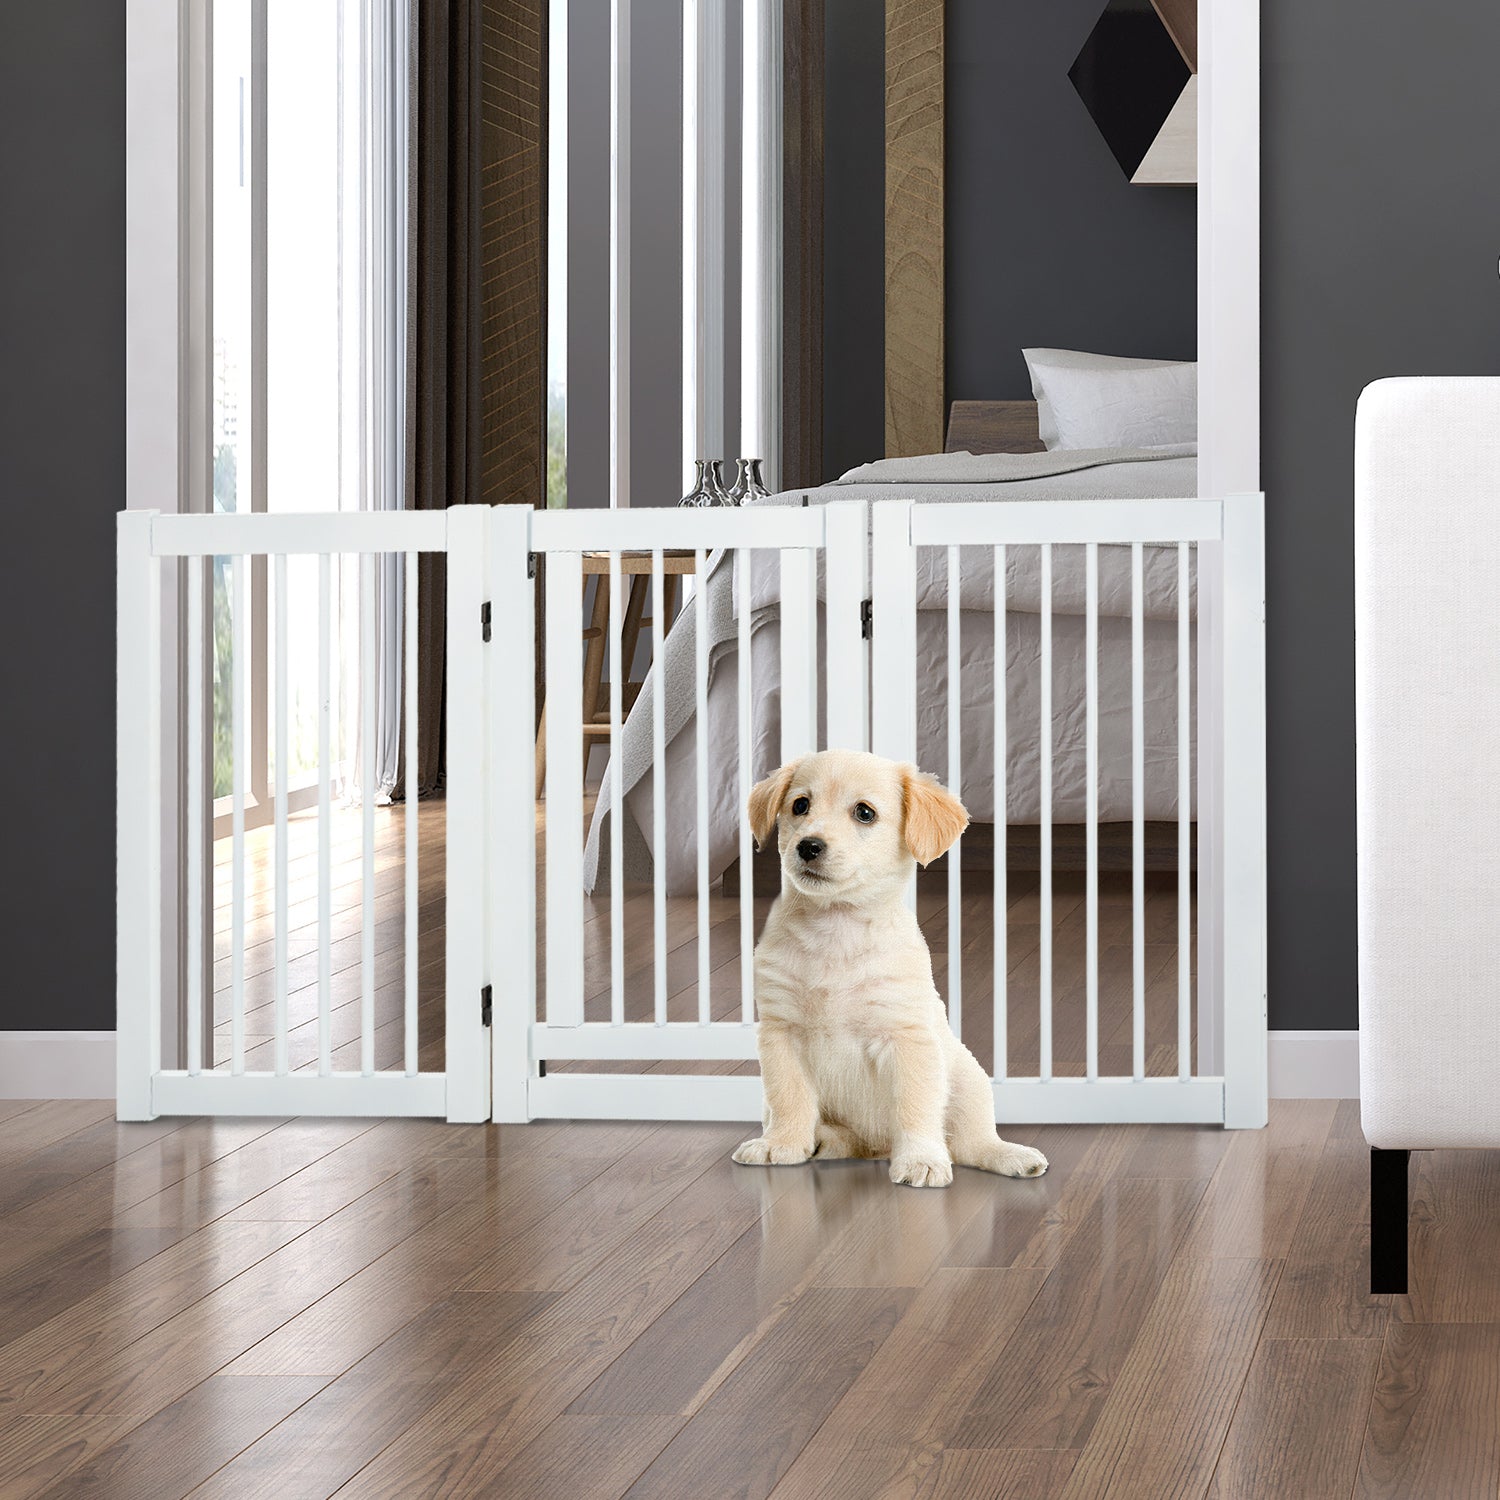 MDF Freestanding Expandable Pet Gate w/ Latched Door White